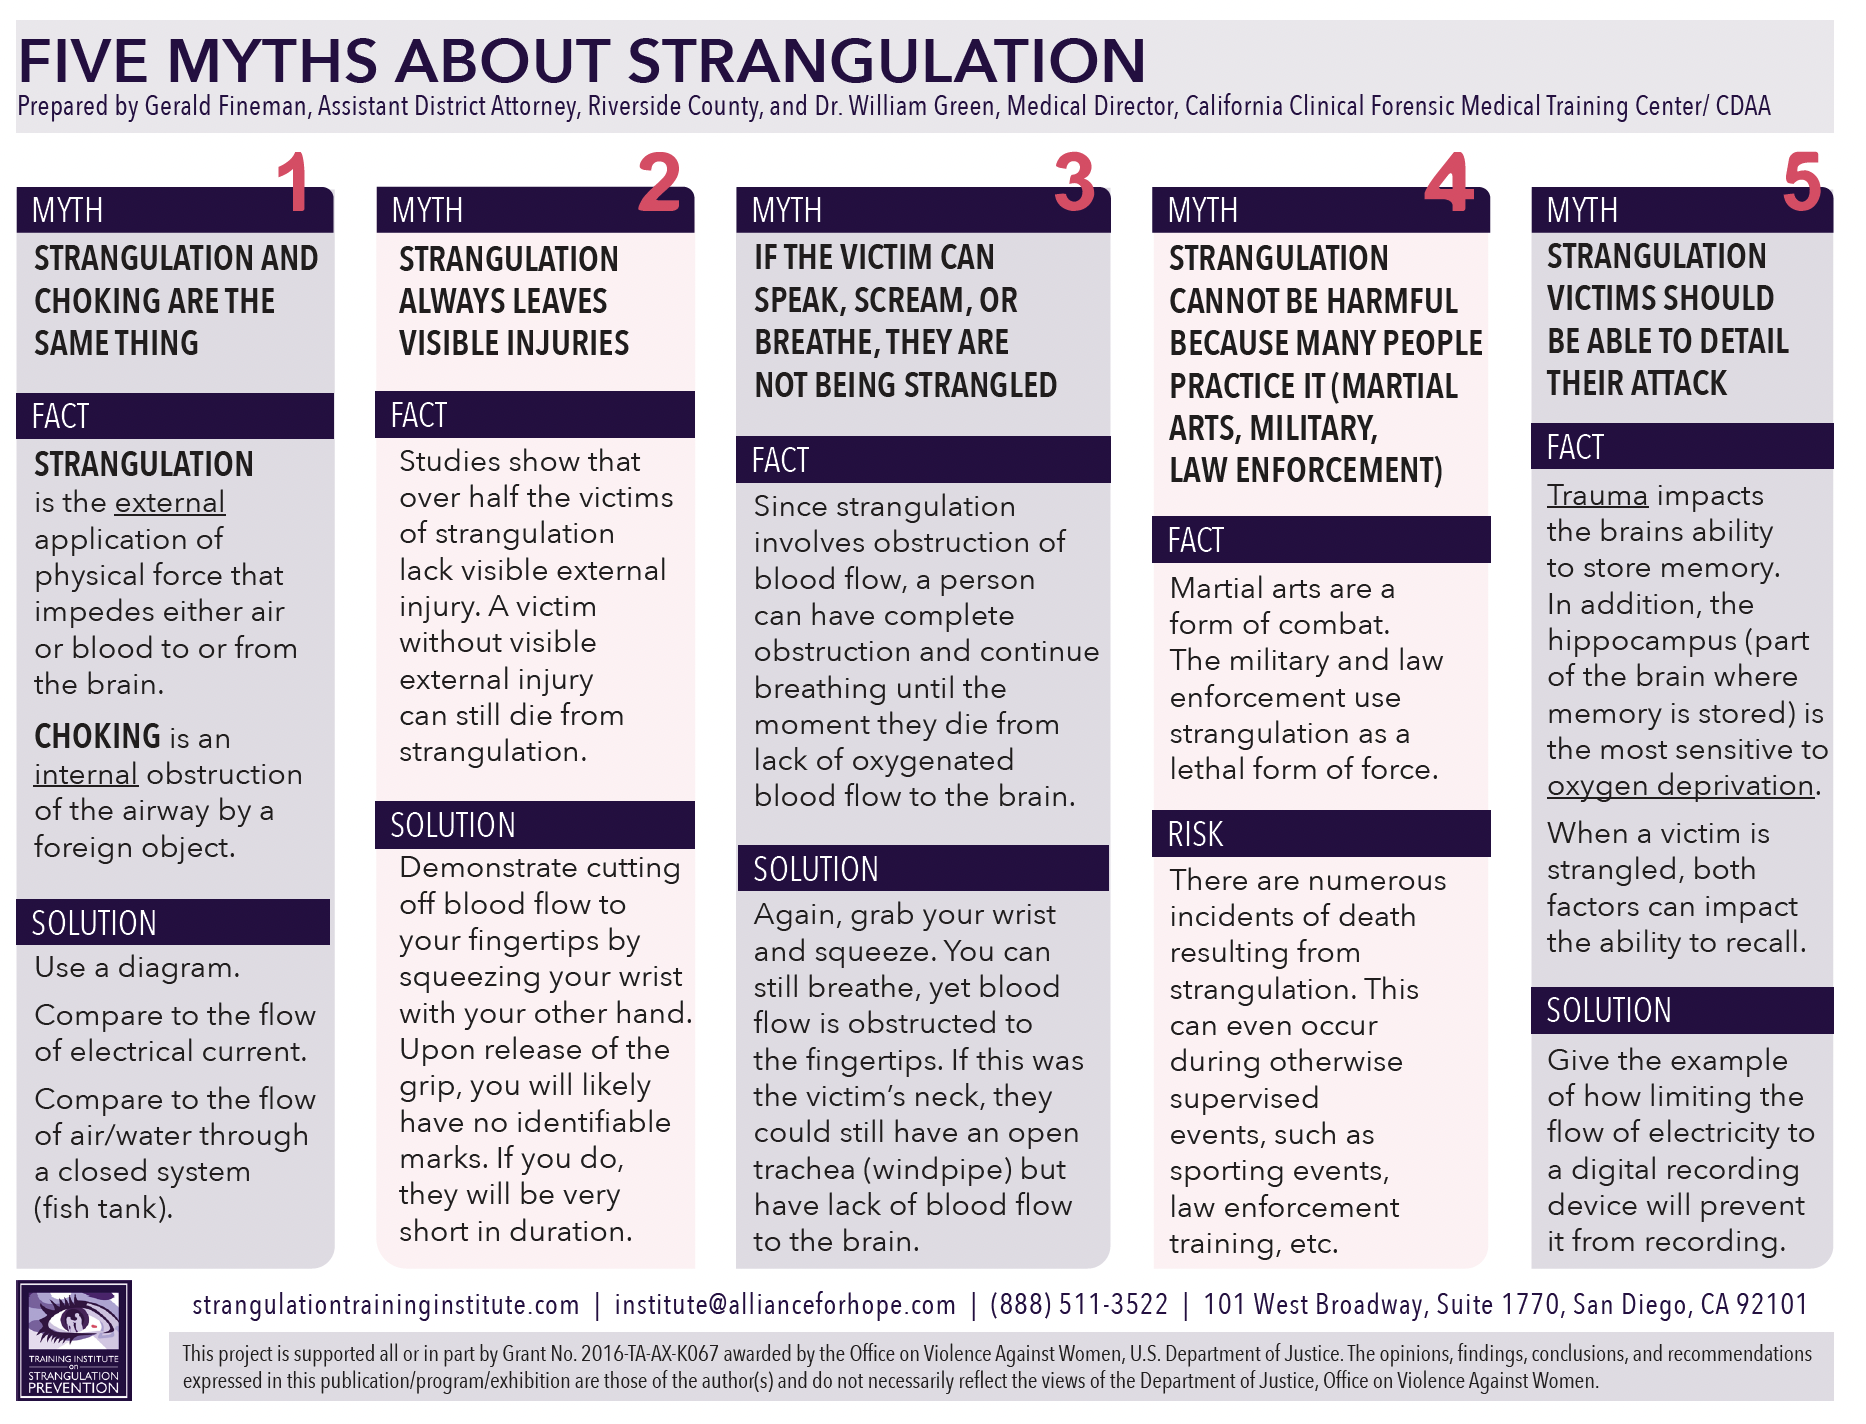 The document is about the physiological consequences of strangulation, including the occlusion of arterial blood flow and the timeline of events during strangulation.